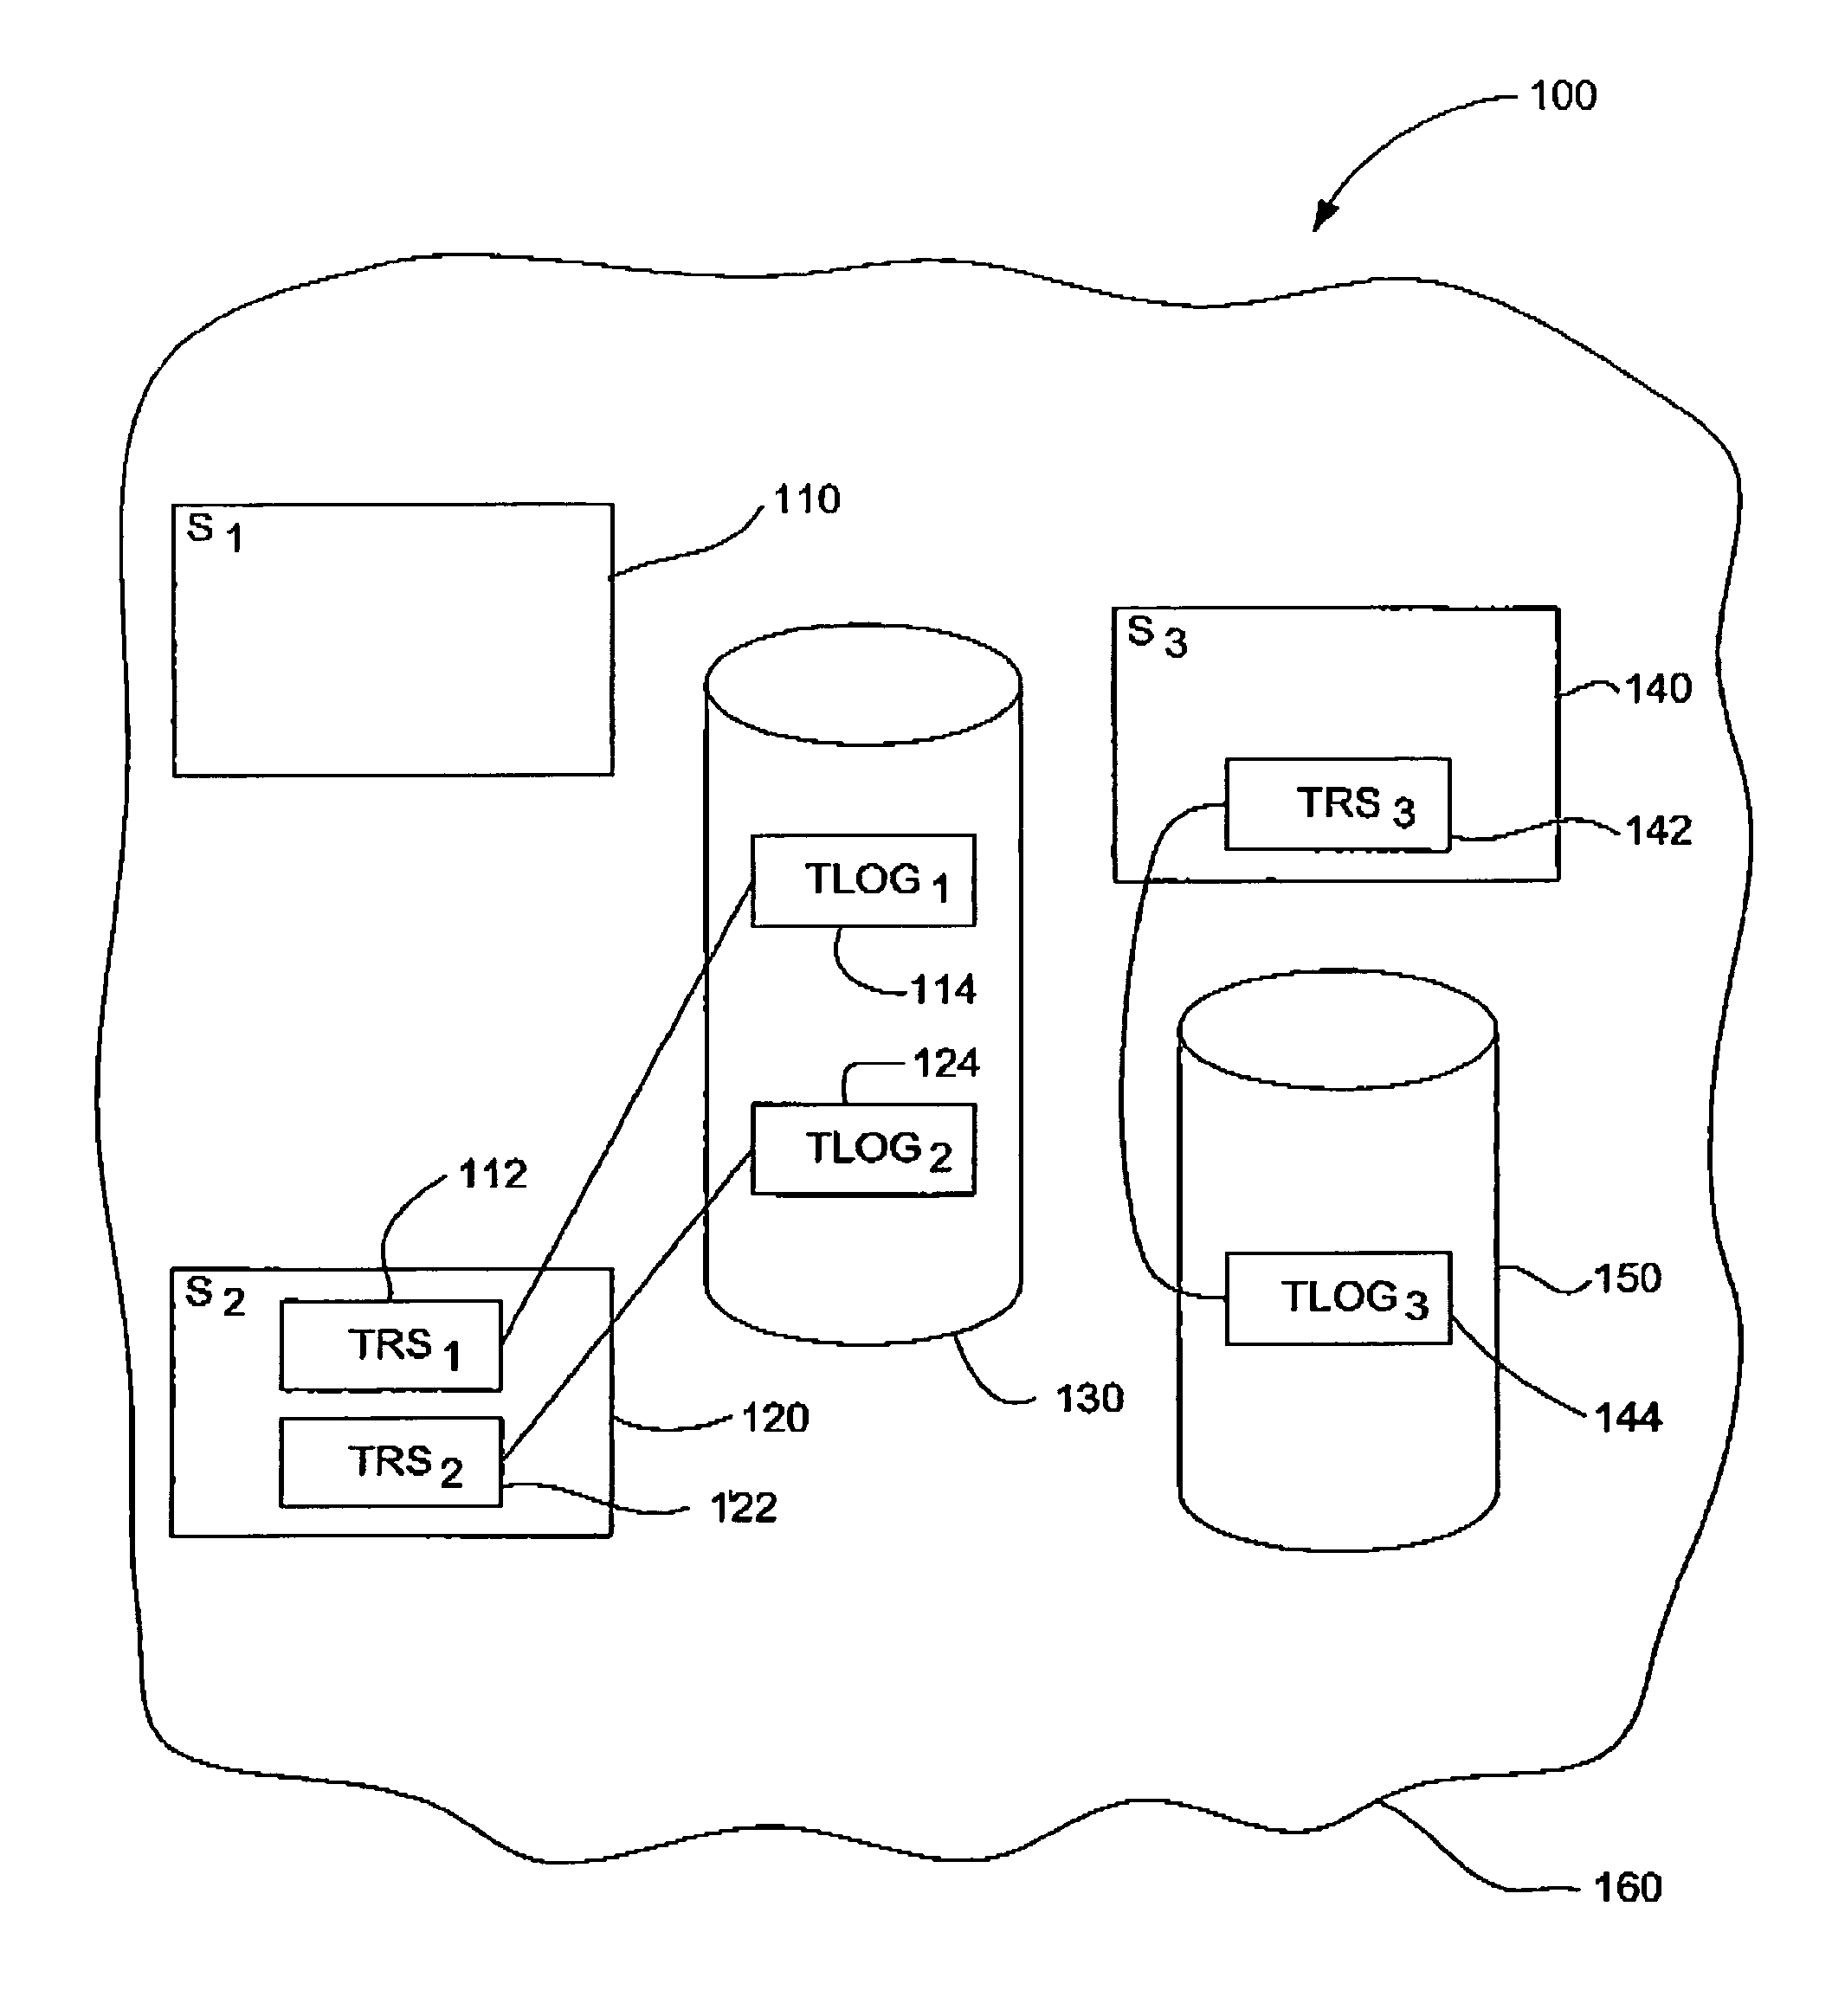 System for highly available transaction recovery for transaction processing systems